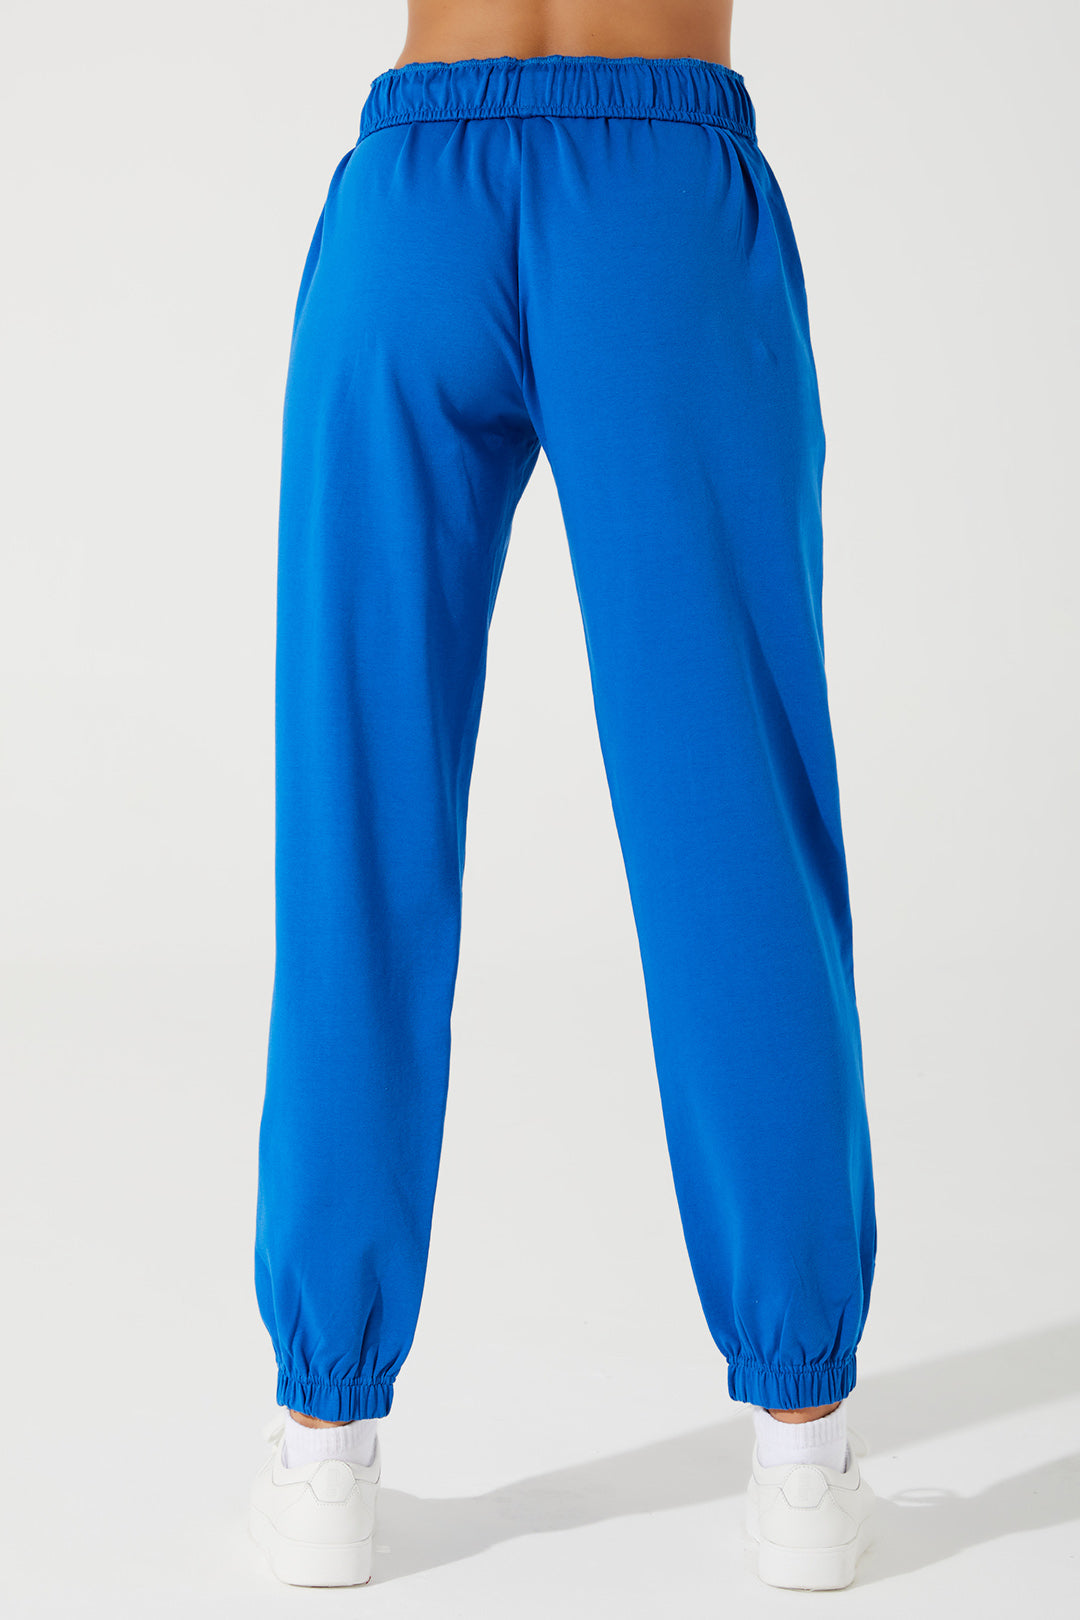 Janet wearing Atlantis Blue sweatpants for women, style OW-0036-WSW-BL, in a 3rd image.